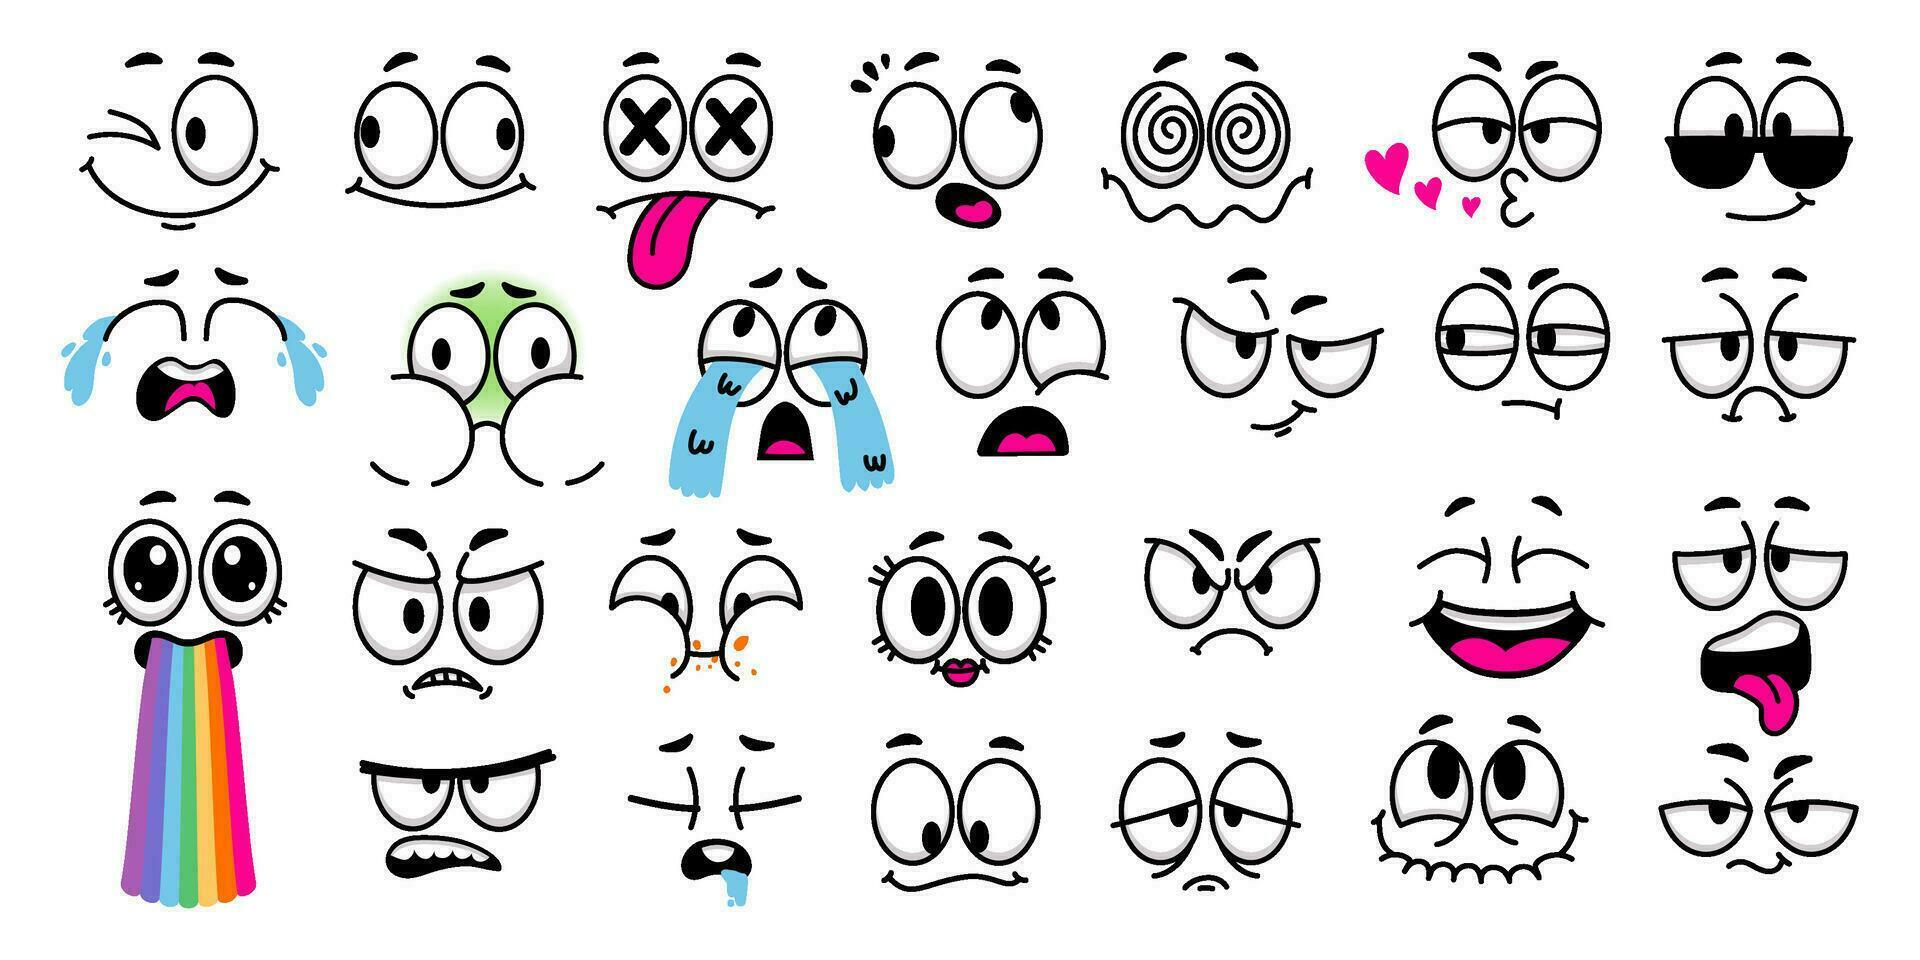 Cartoon facial expressions. Comic faces with caricature eyes, doodle eyebrows and mouth for 1970 animation style character design vector set